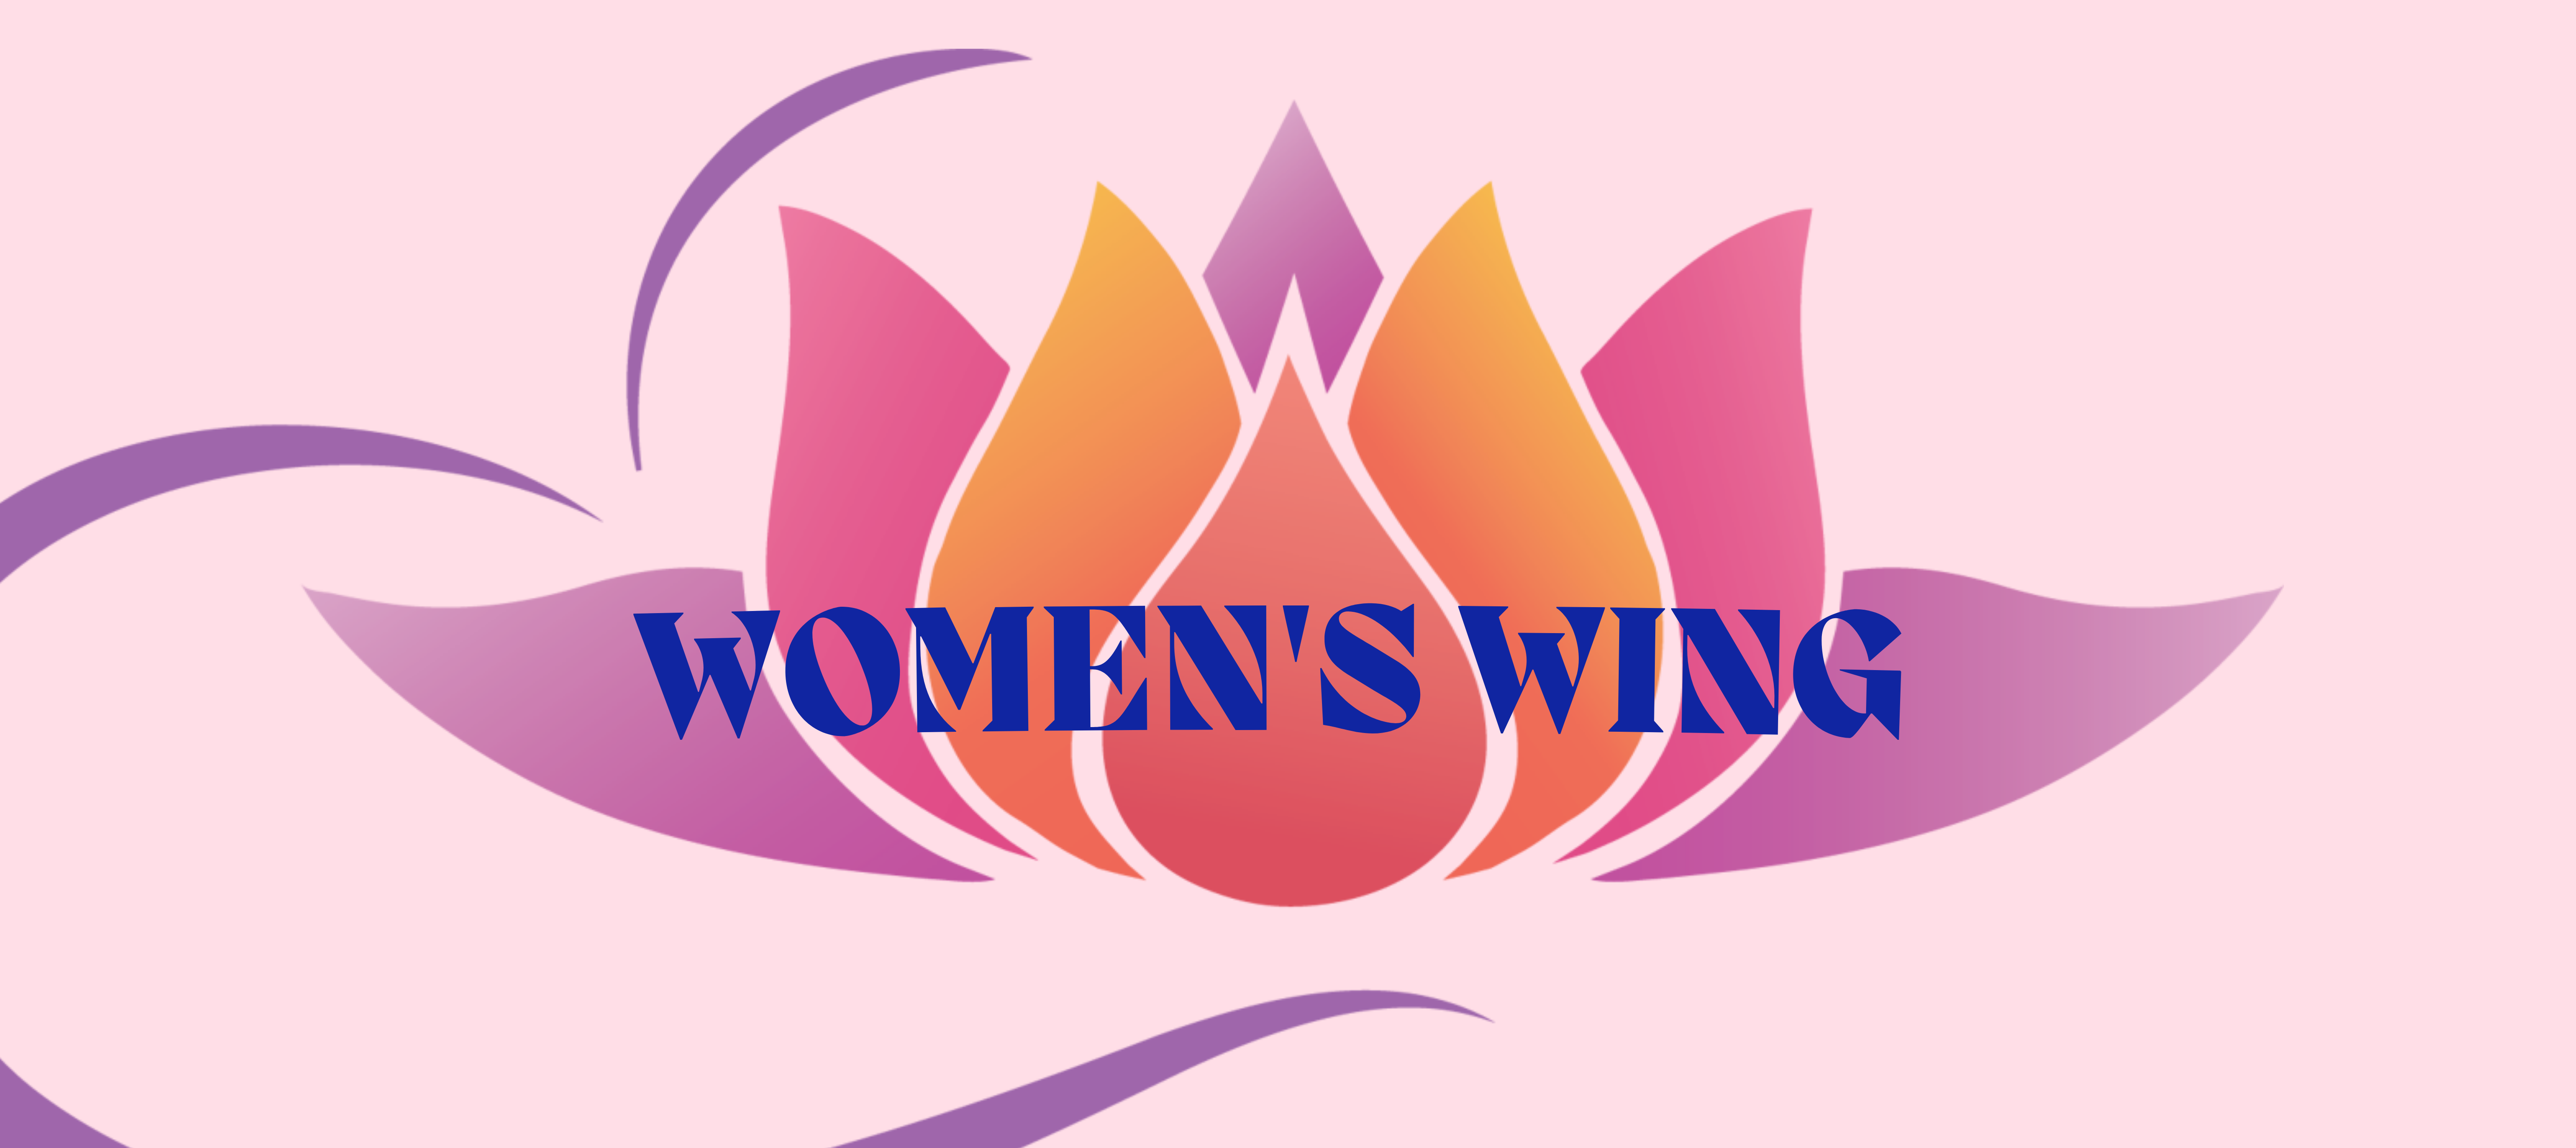 https://sathyasai.us/sites/default/files/pages/Women%20Group/Womens%20Wing.png